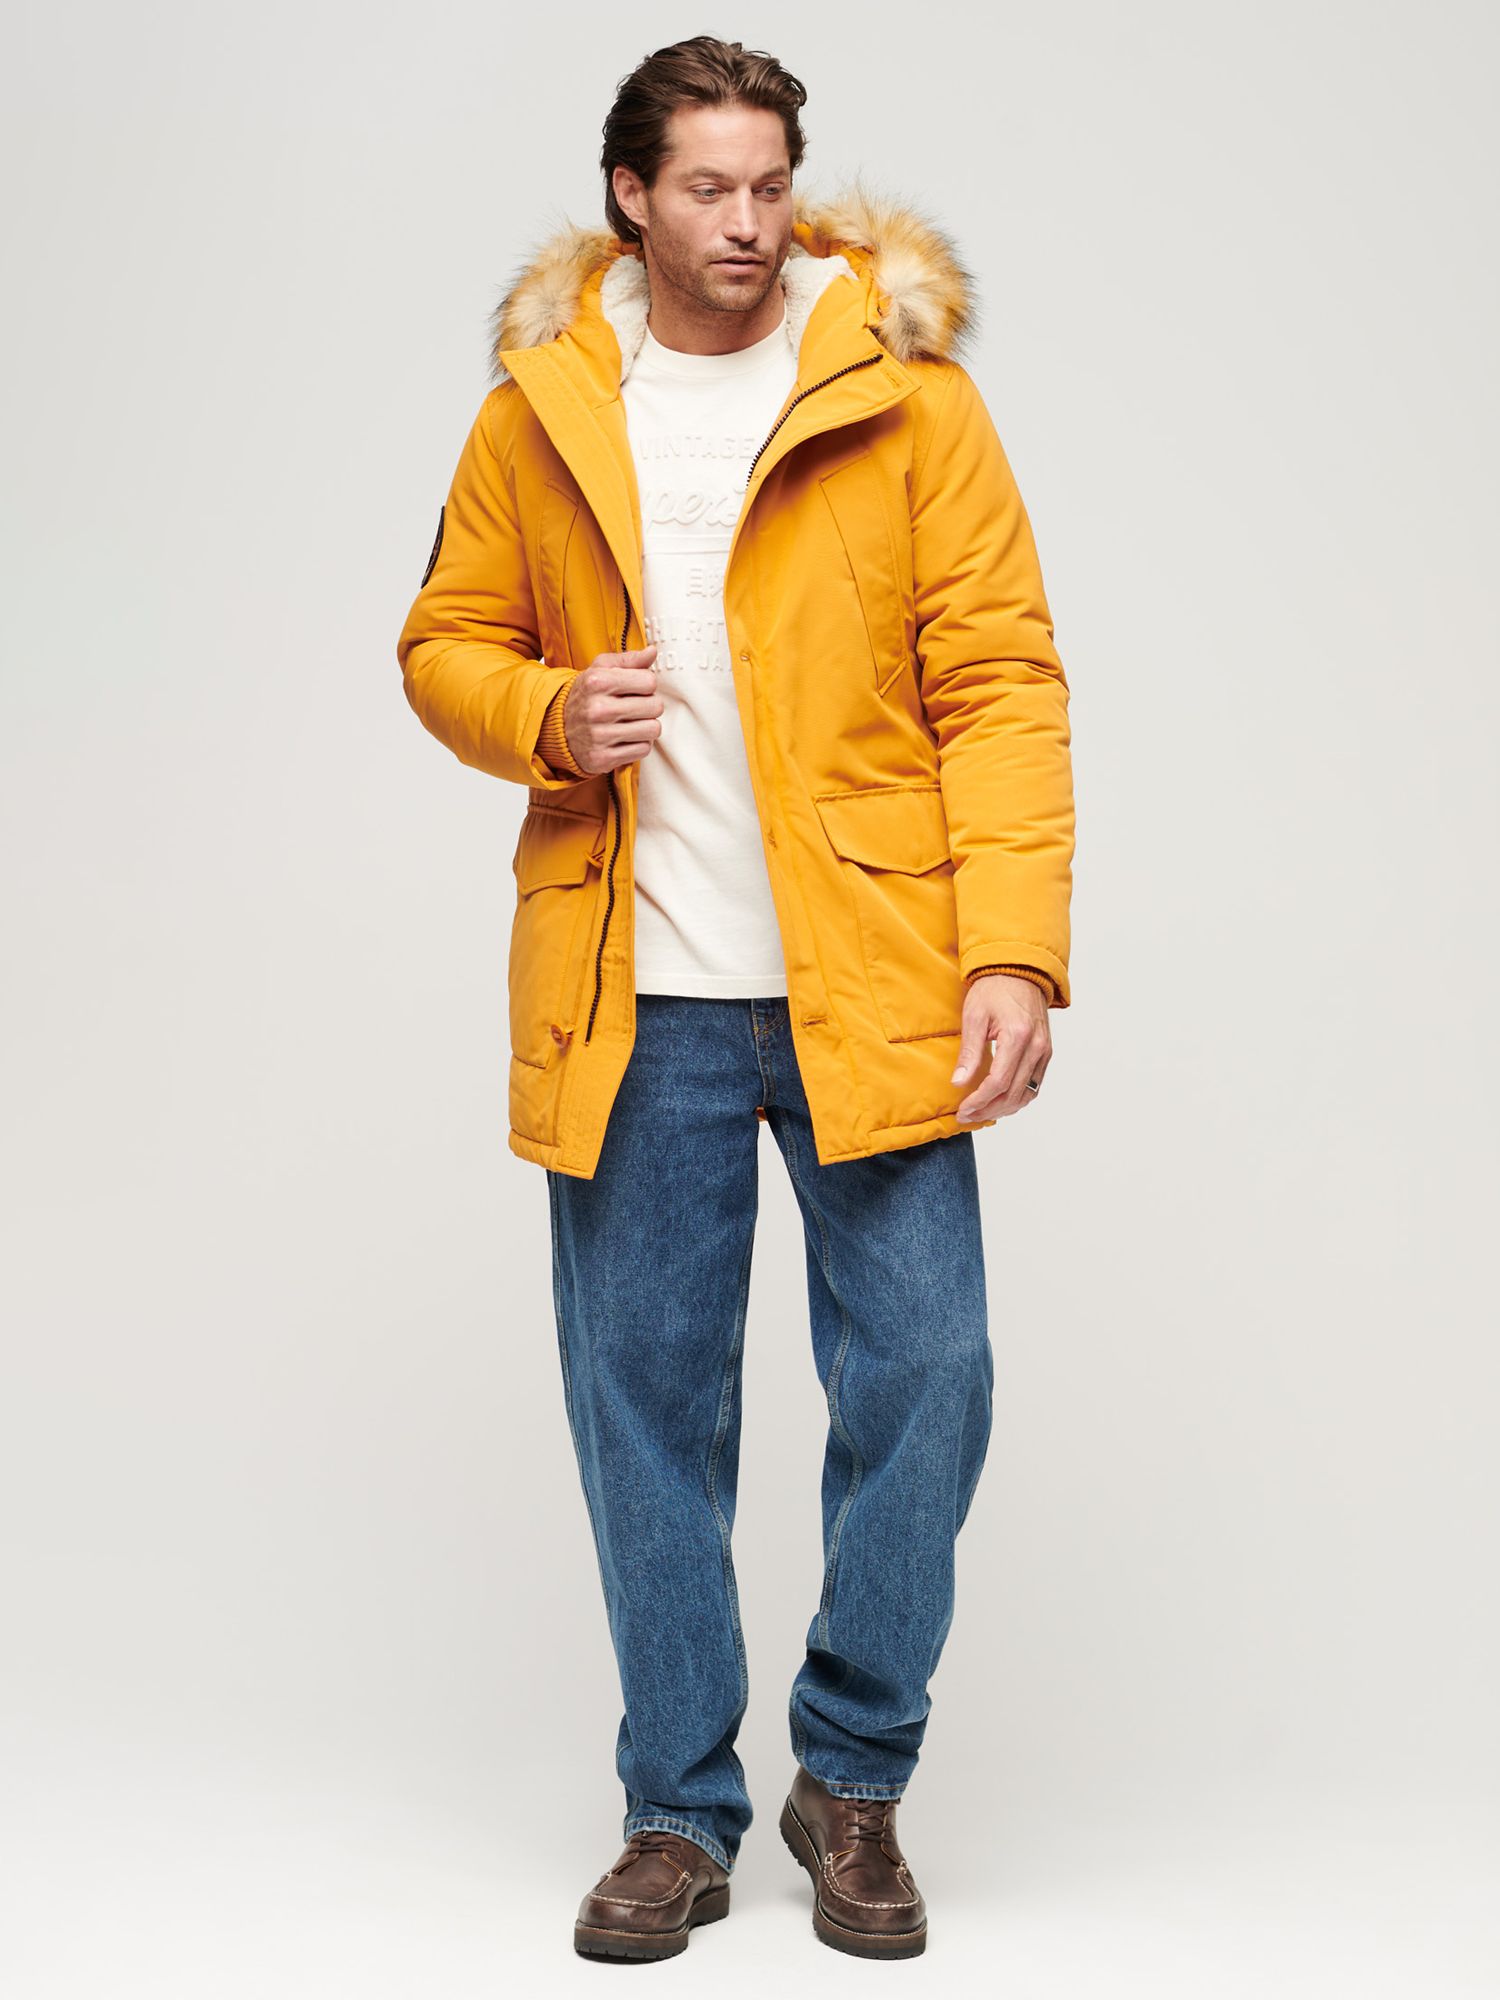 Superdry Everest Faux Fur Hooded Parka Coat, Mustard Yellow, XL